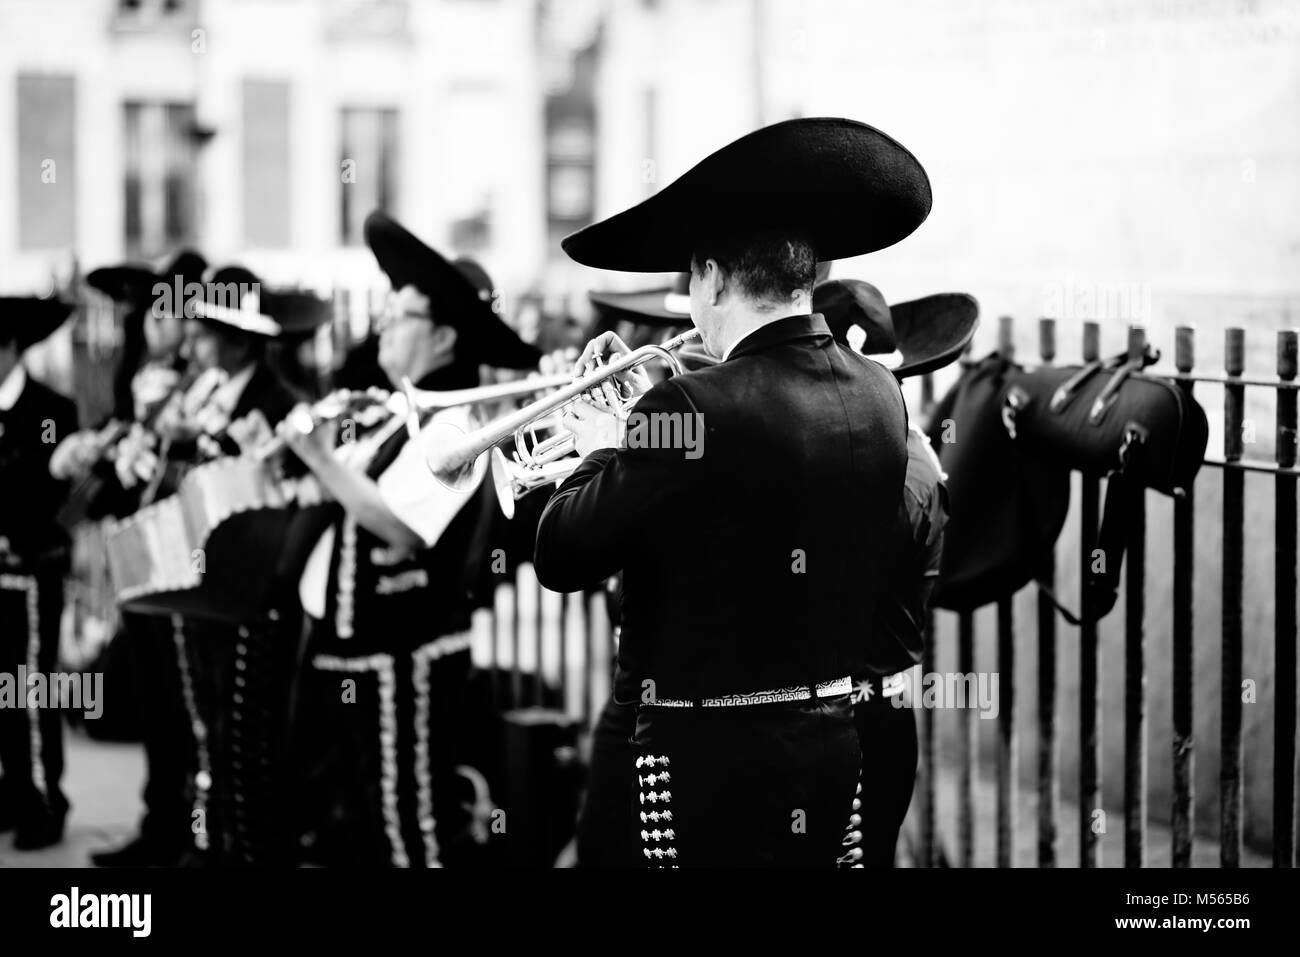 Street performing mariachis. Trumpeter in the front of mariachi band. Stock Photo